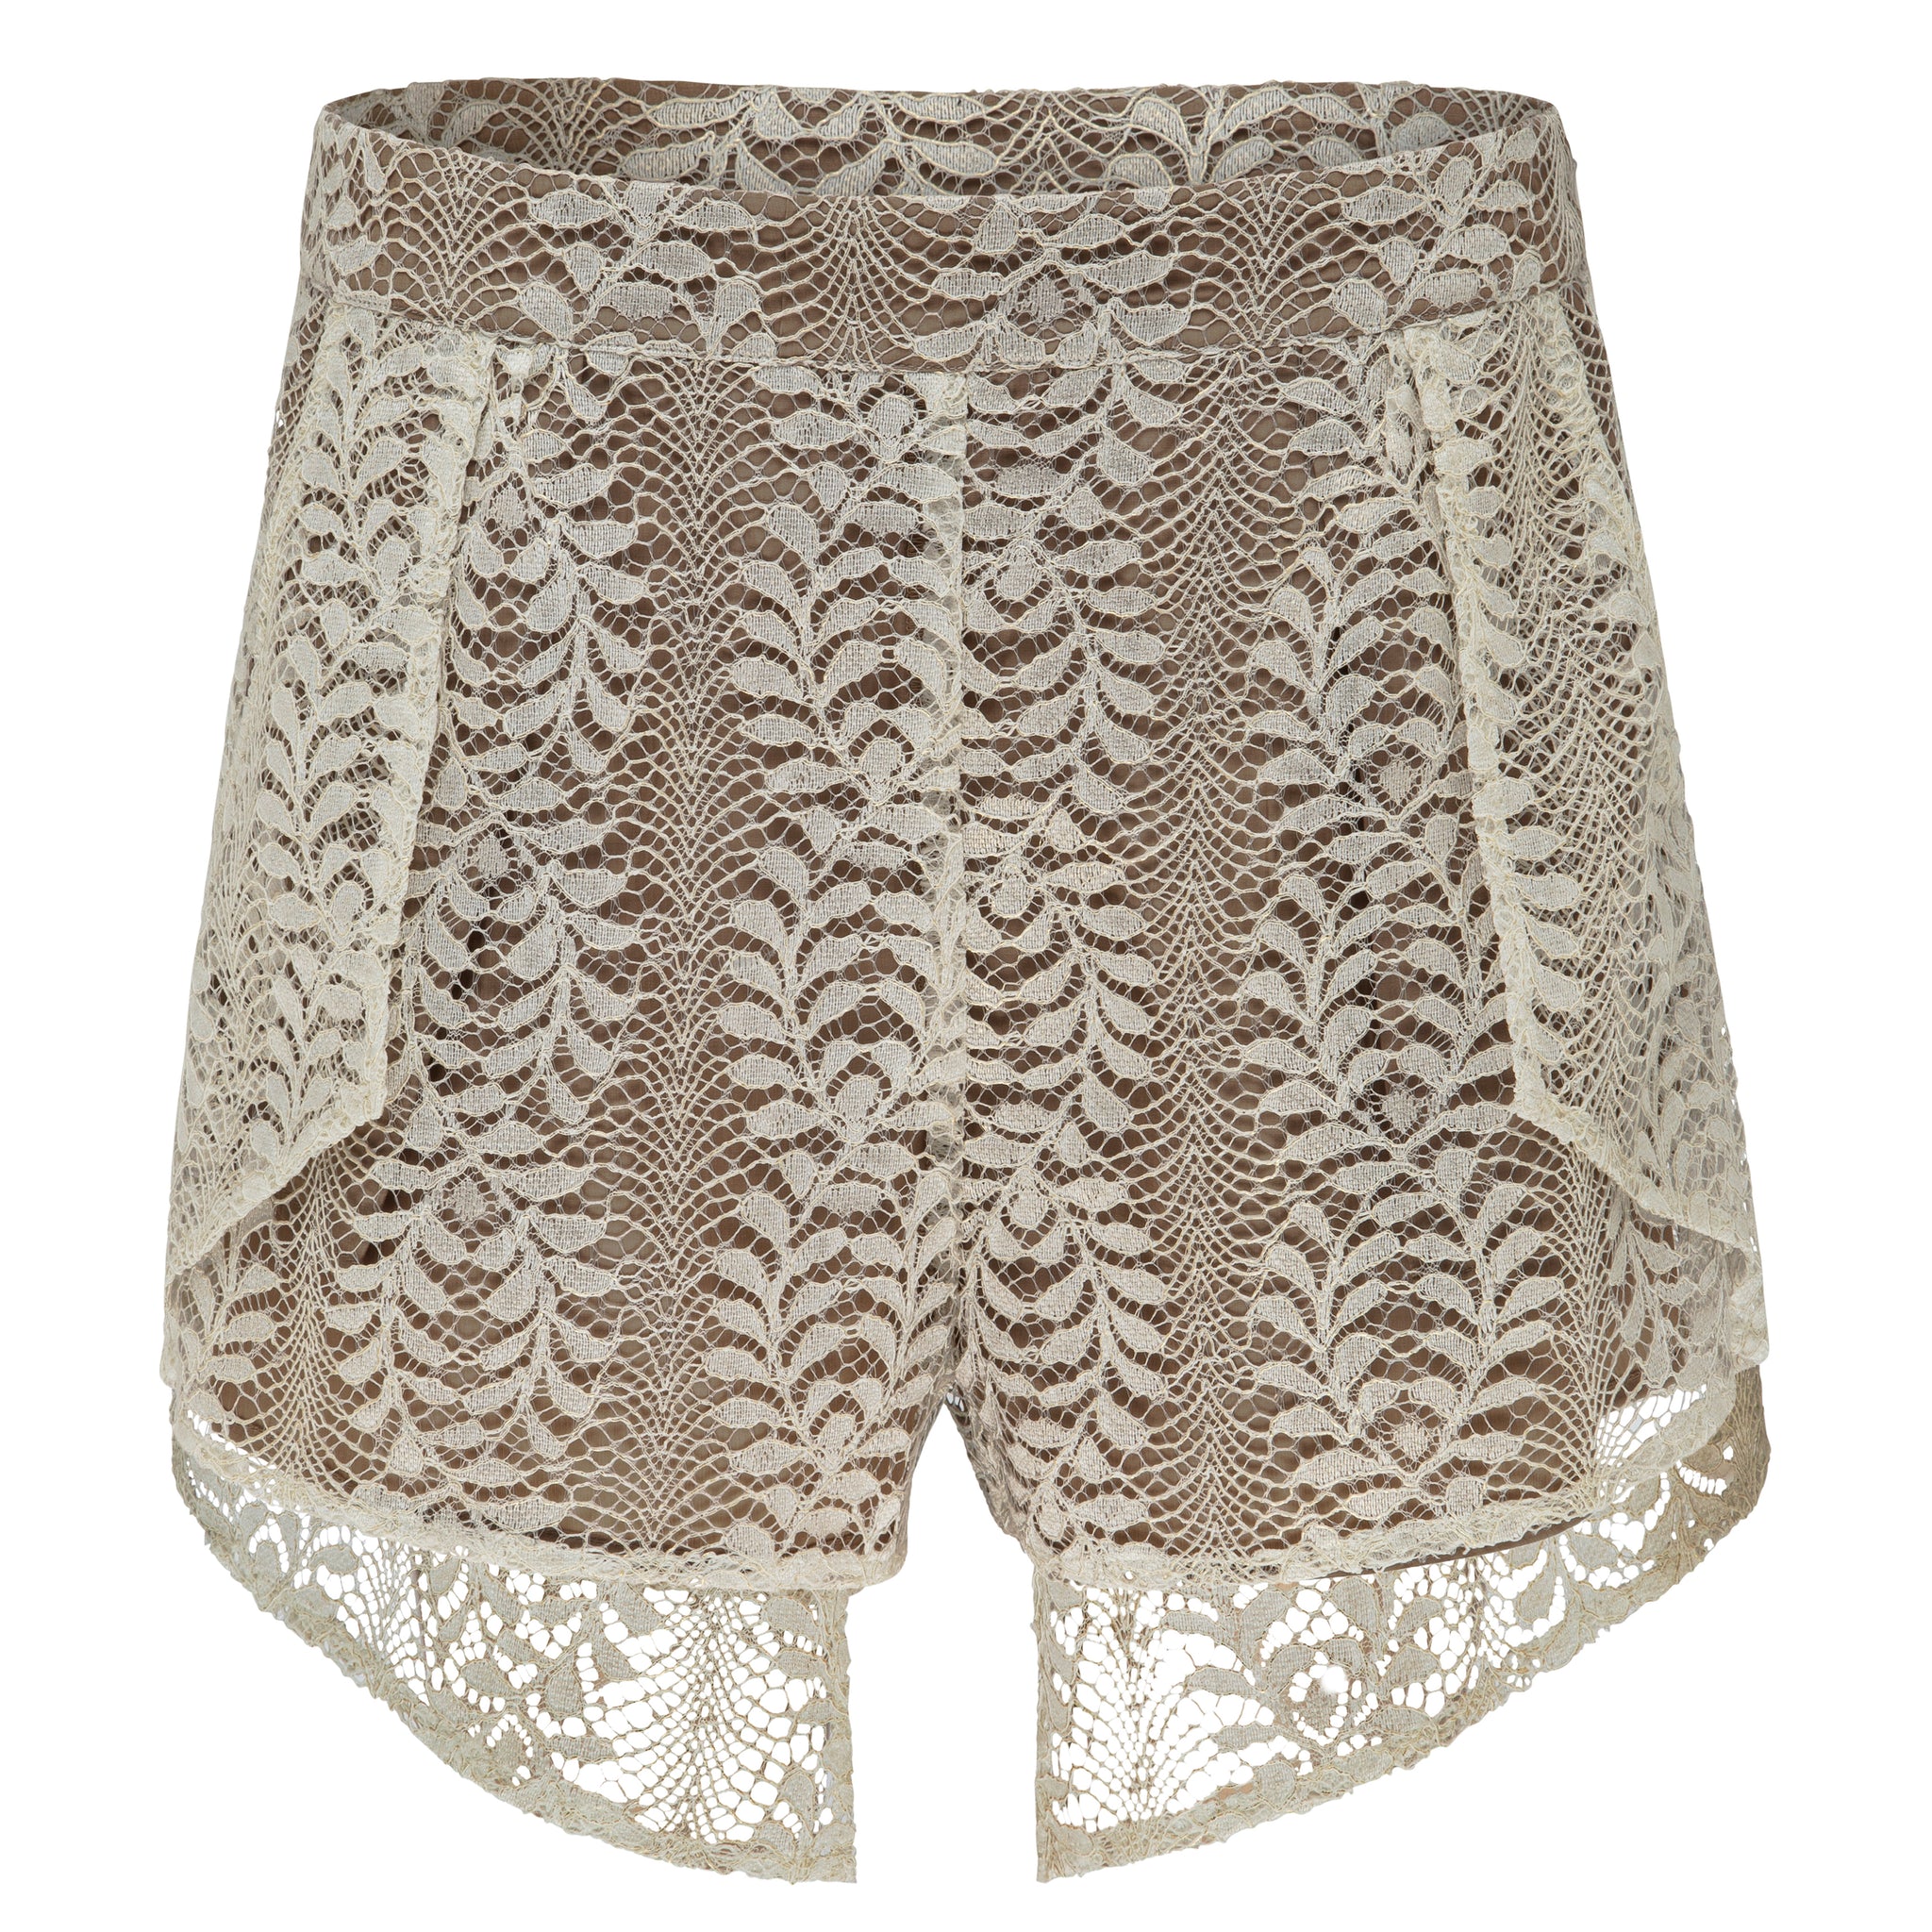 Atheia Short - Fine Lace with Gold Print